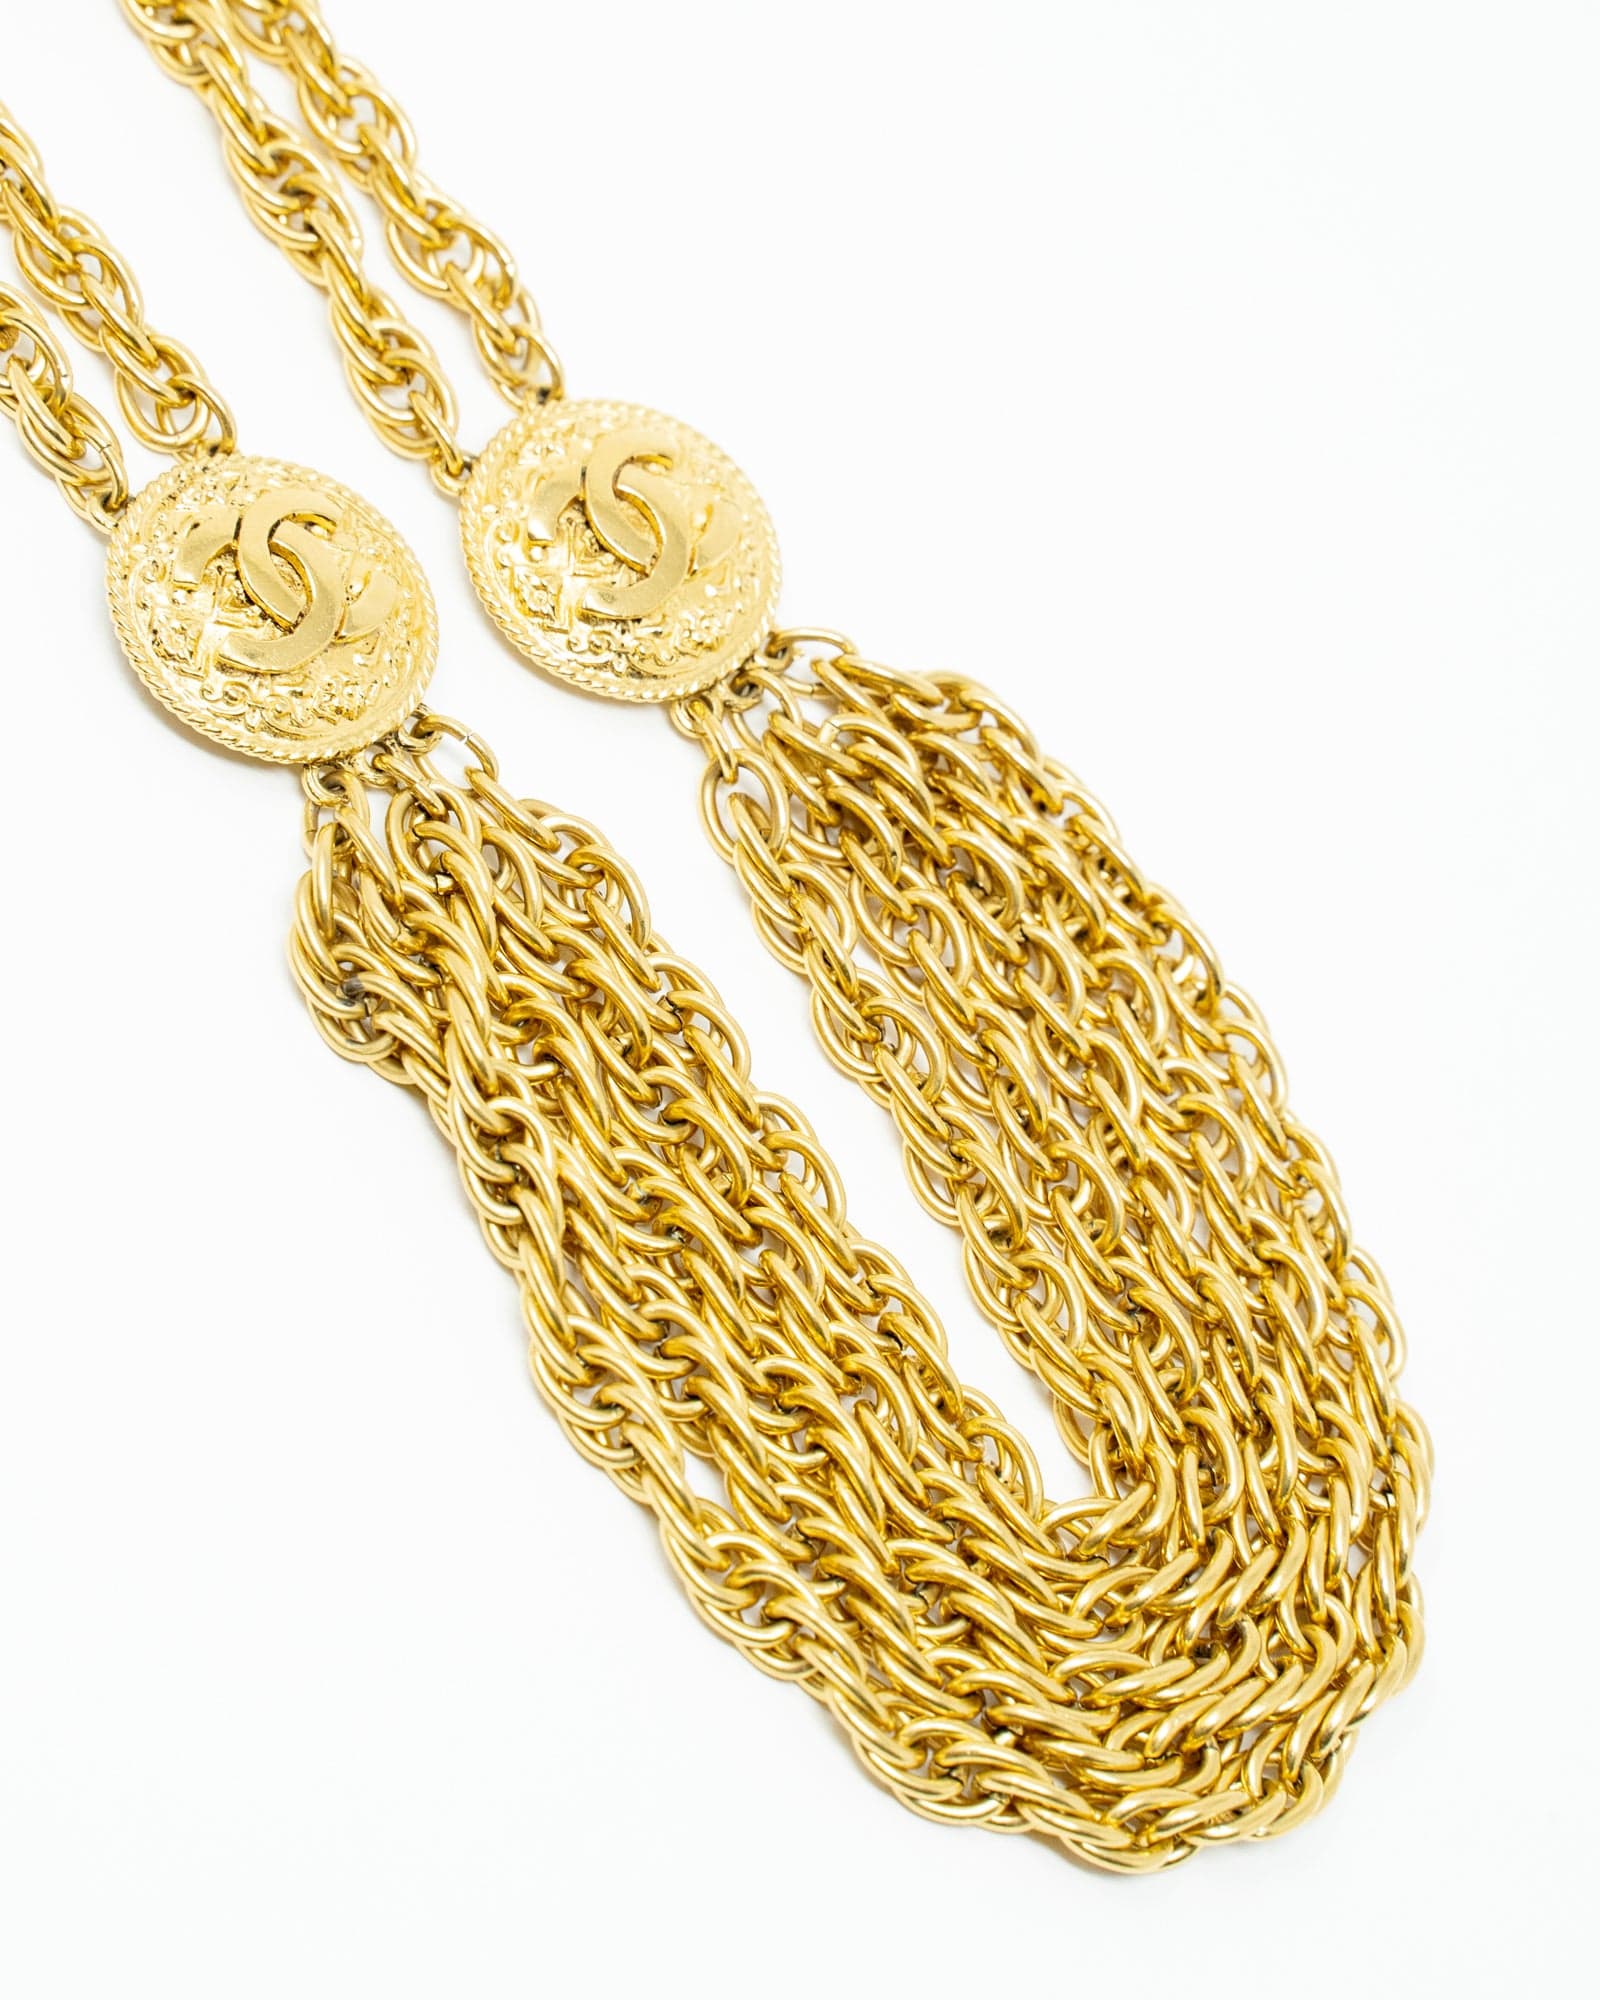 Chanel CHANEL vintage multi row chain necklace with CC logo coin medallions, 1984 - AEC1005